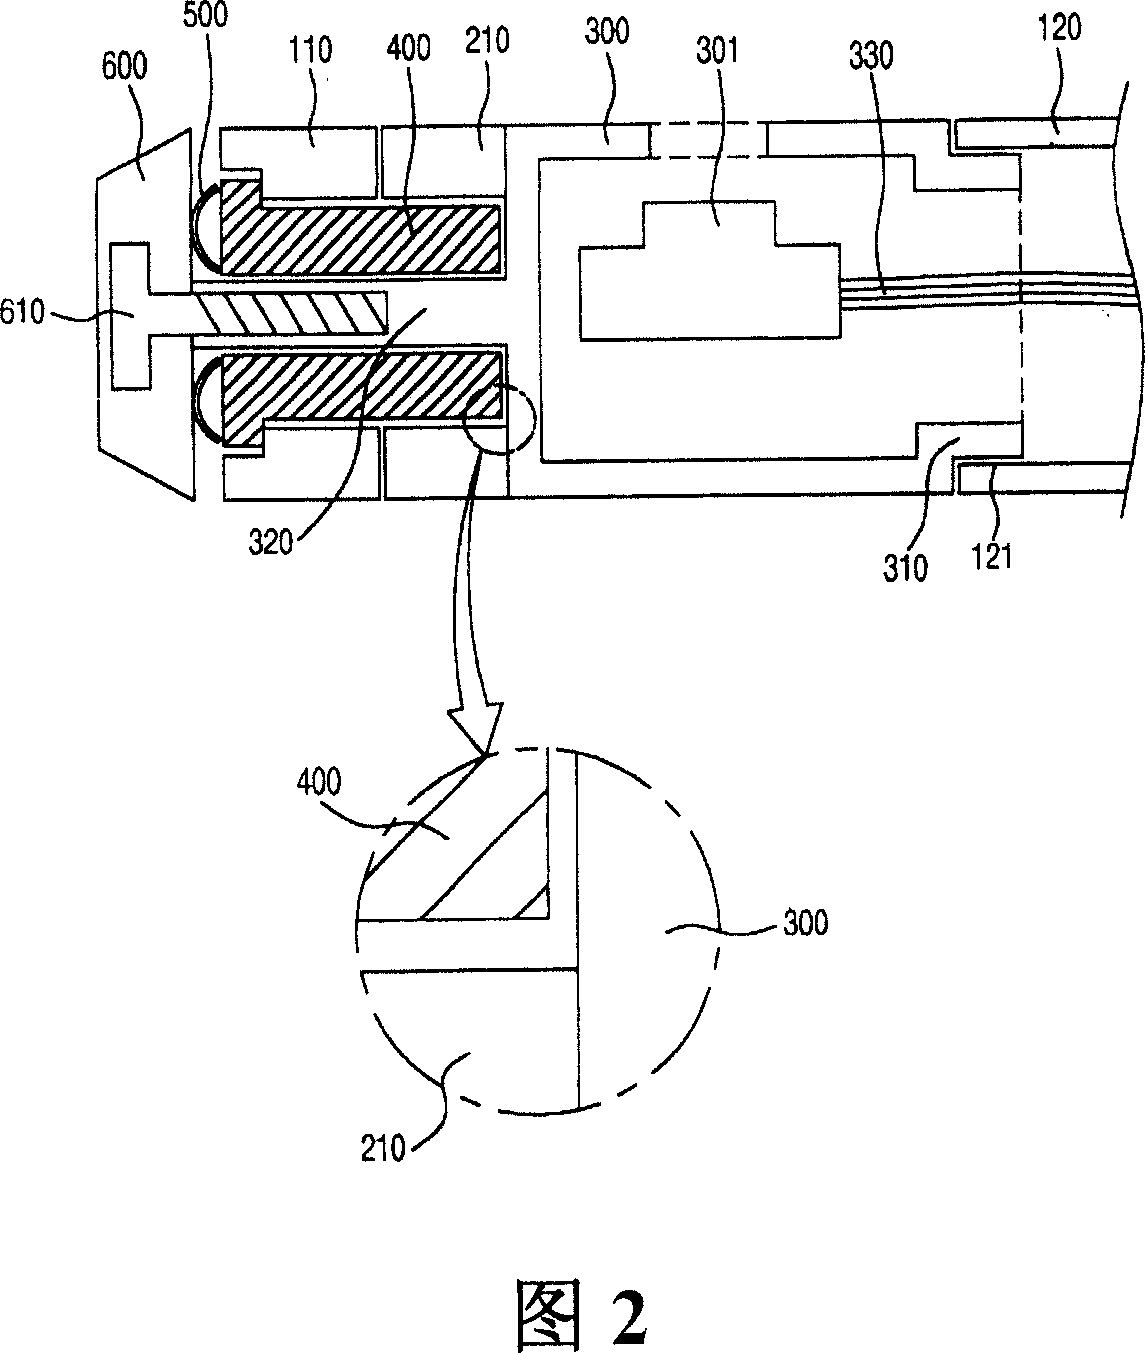 A camera device structure and mobile communication terminal therewith